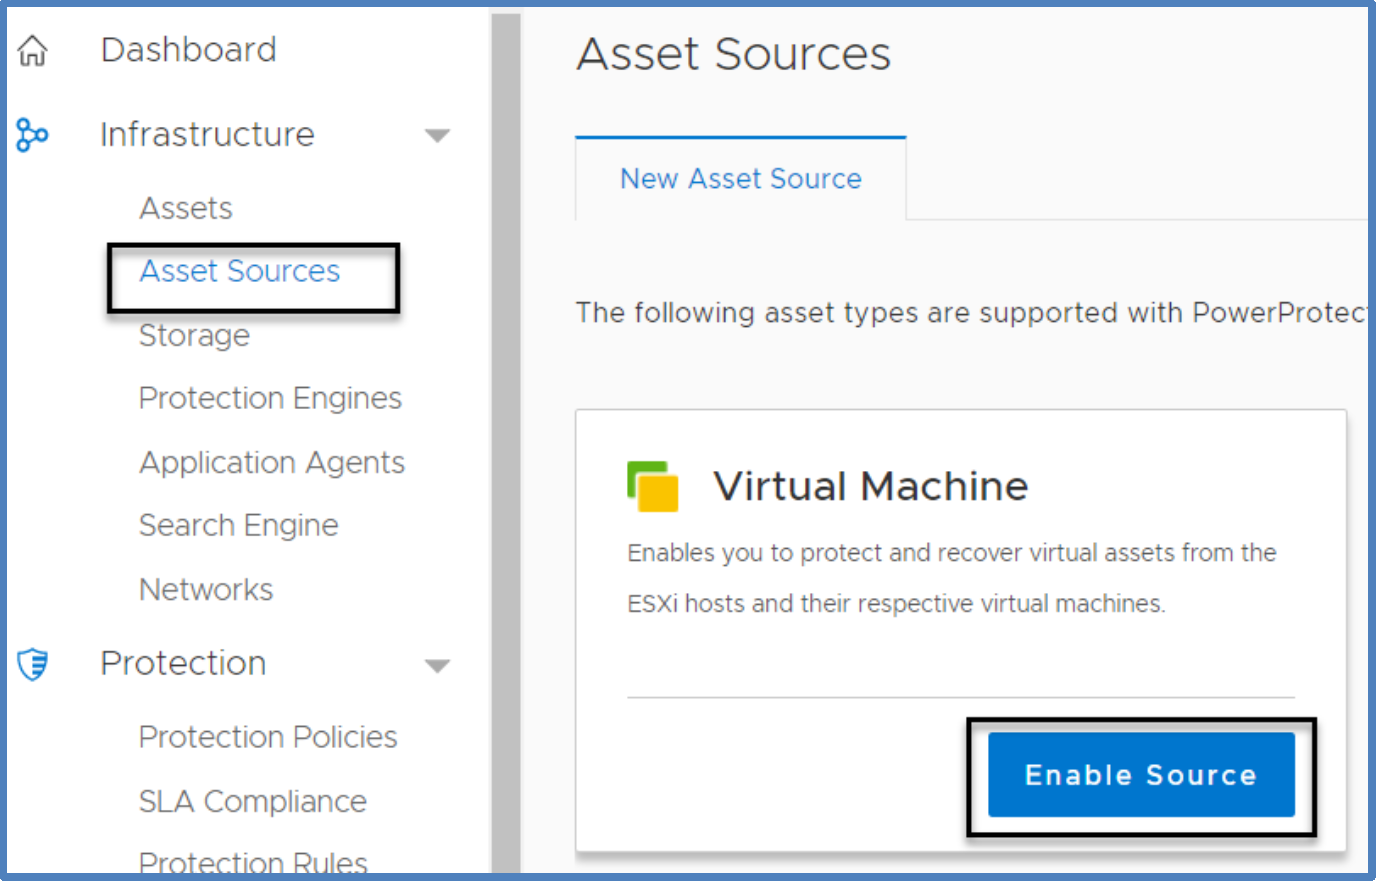 This figure shows the Asset Sources Page